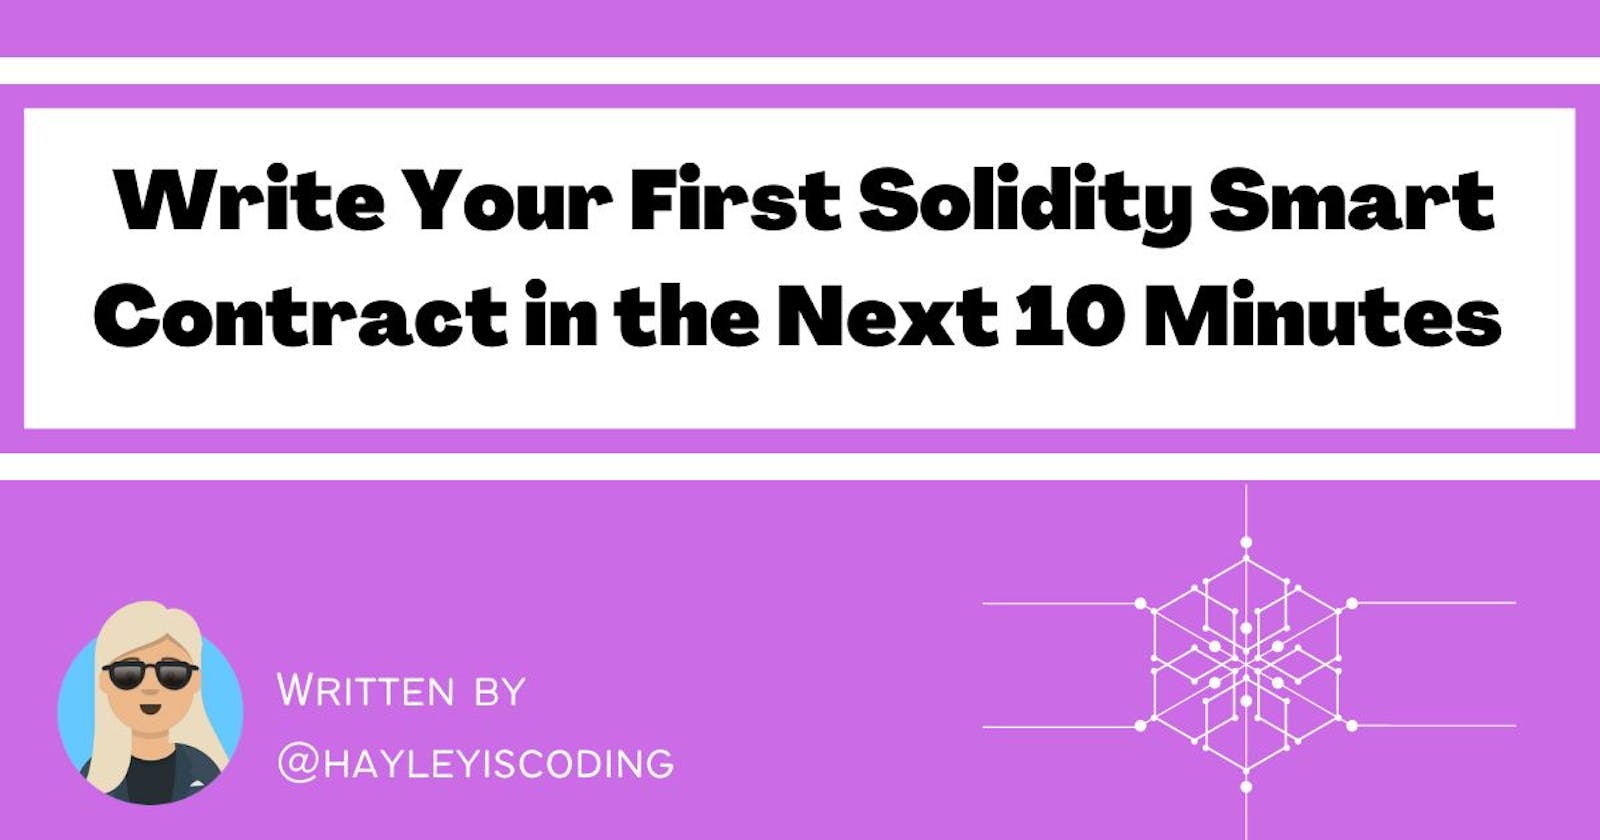 Write Your First Solidity Smart Contract in the Next 10 Minutes